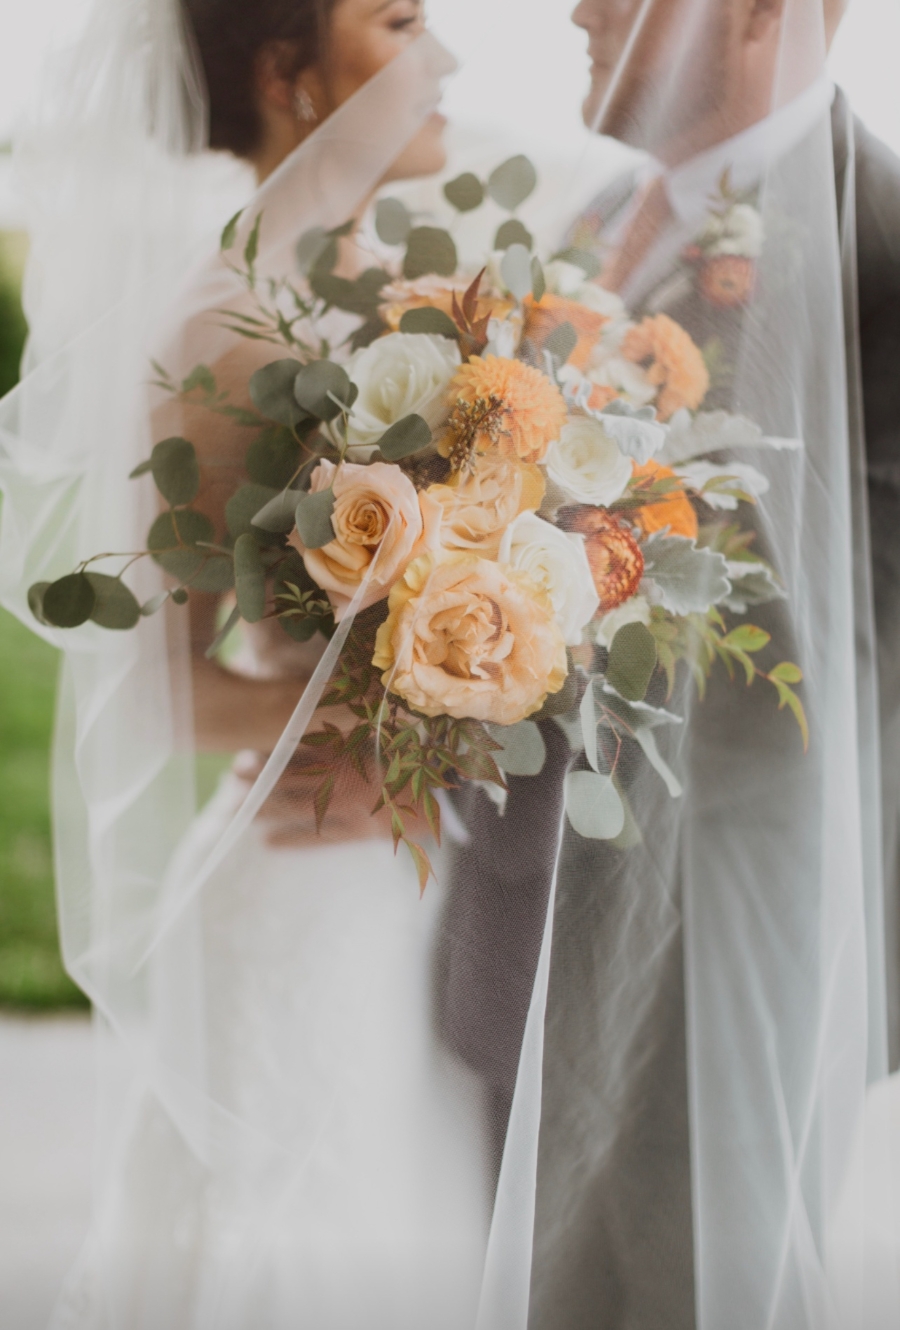 How to Incorporate the Pantone 2021 Colors Into Your Wedding from Amy & I Designs